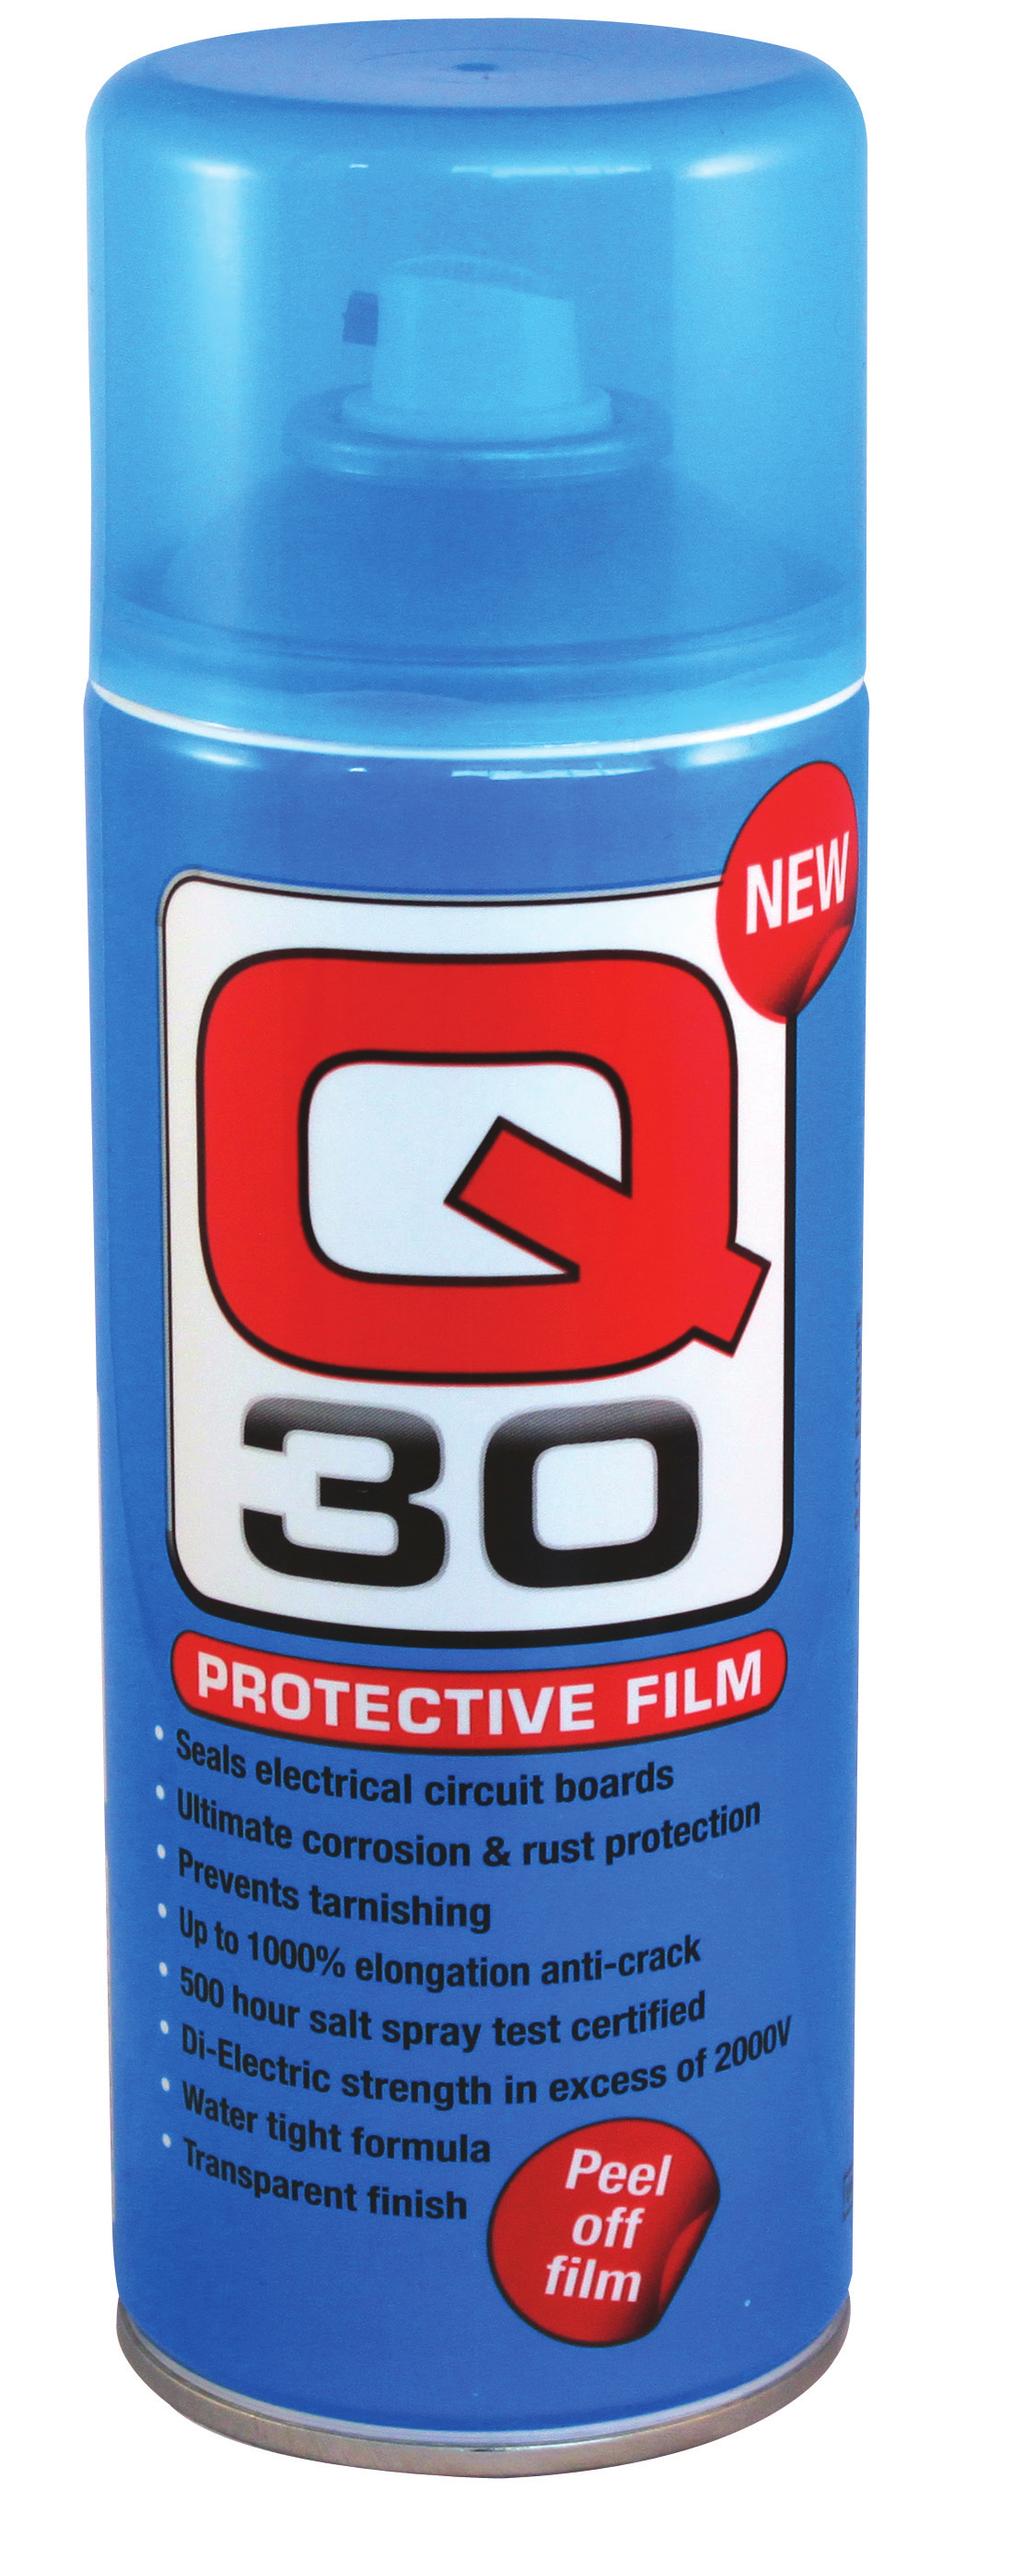 30 super protective film seals electrical circuit boards prevents rust & Corrosion prevents tarnishing 500 hr salt spray test certified up to 1000% elongation anti-crack peel off film Product